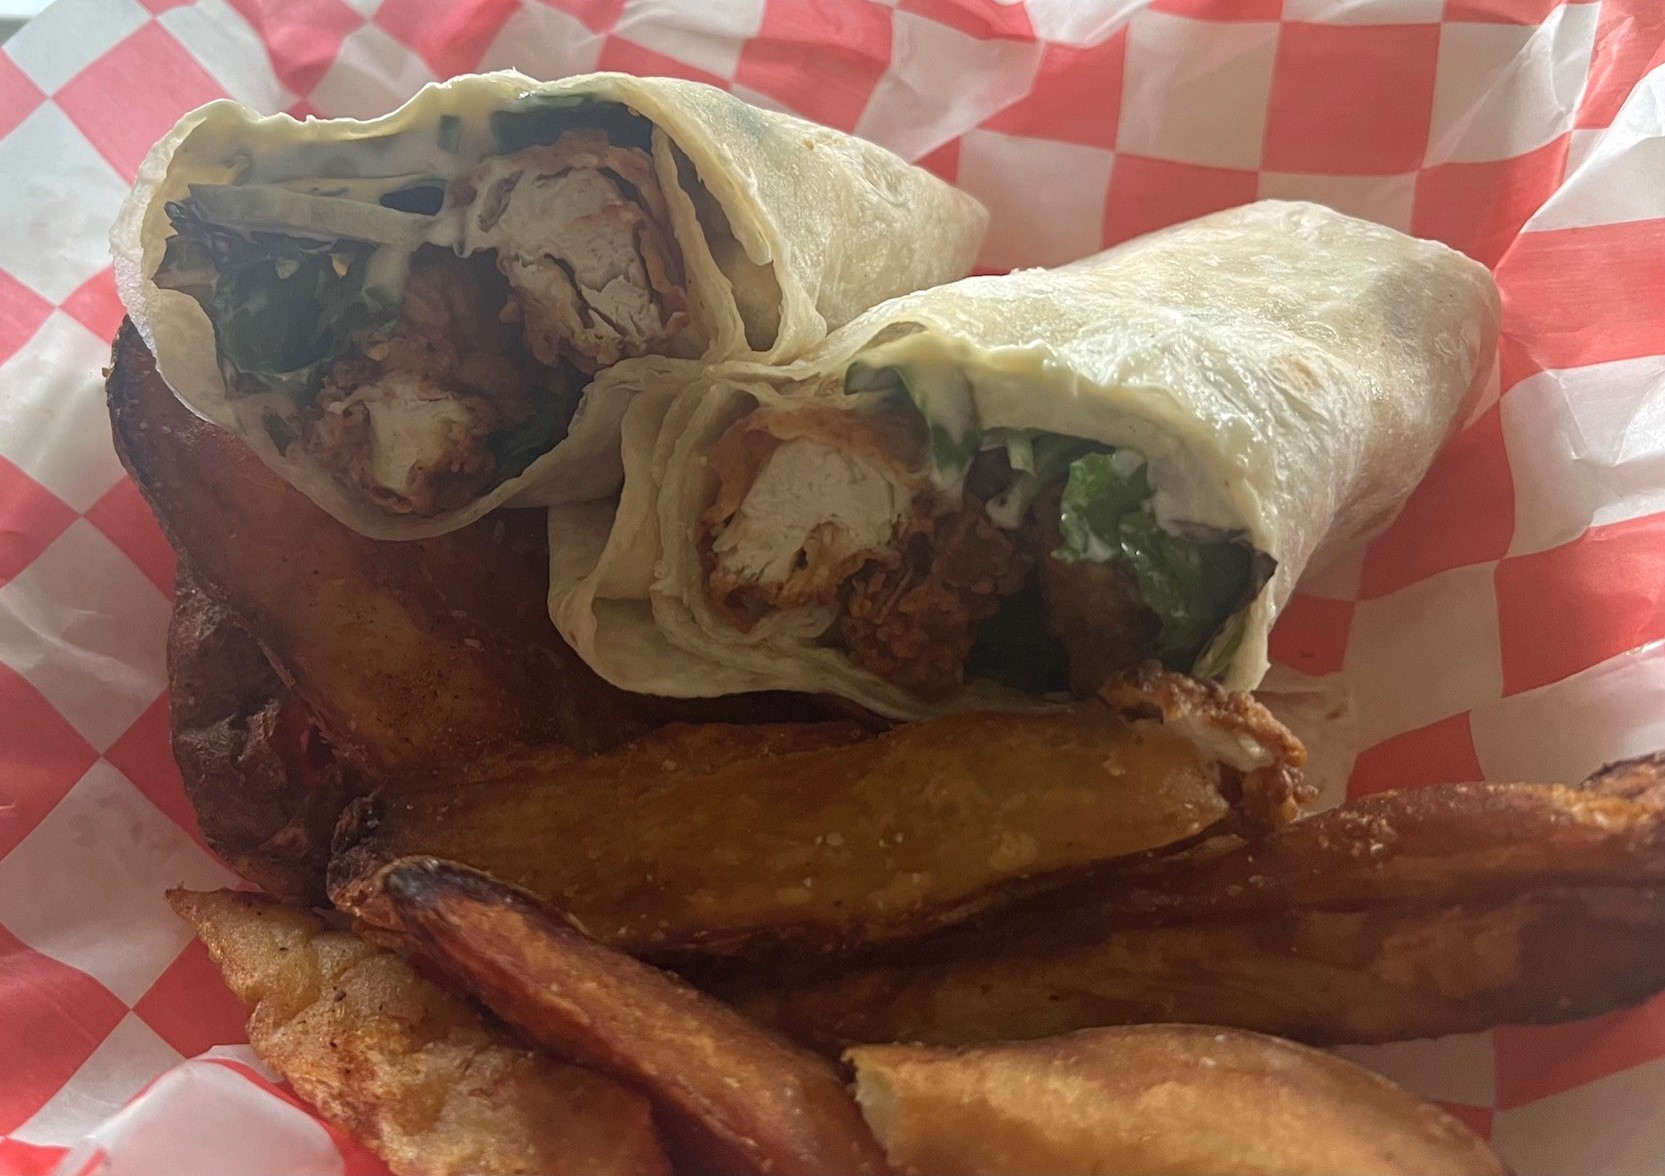 A fried chicken wrap, split in half, sitting in a container lined with red and white checked paper. There is a pile of potato wedges next to the wrap.